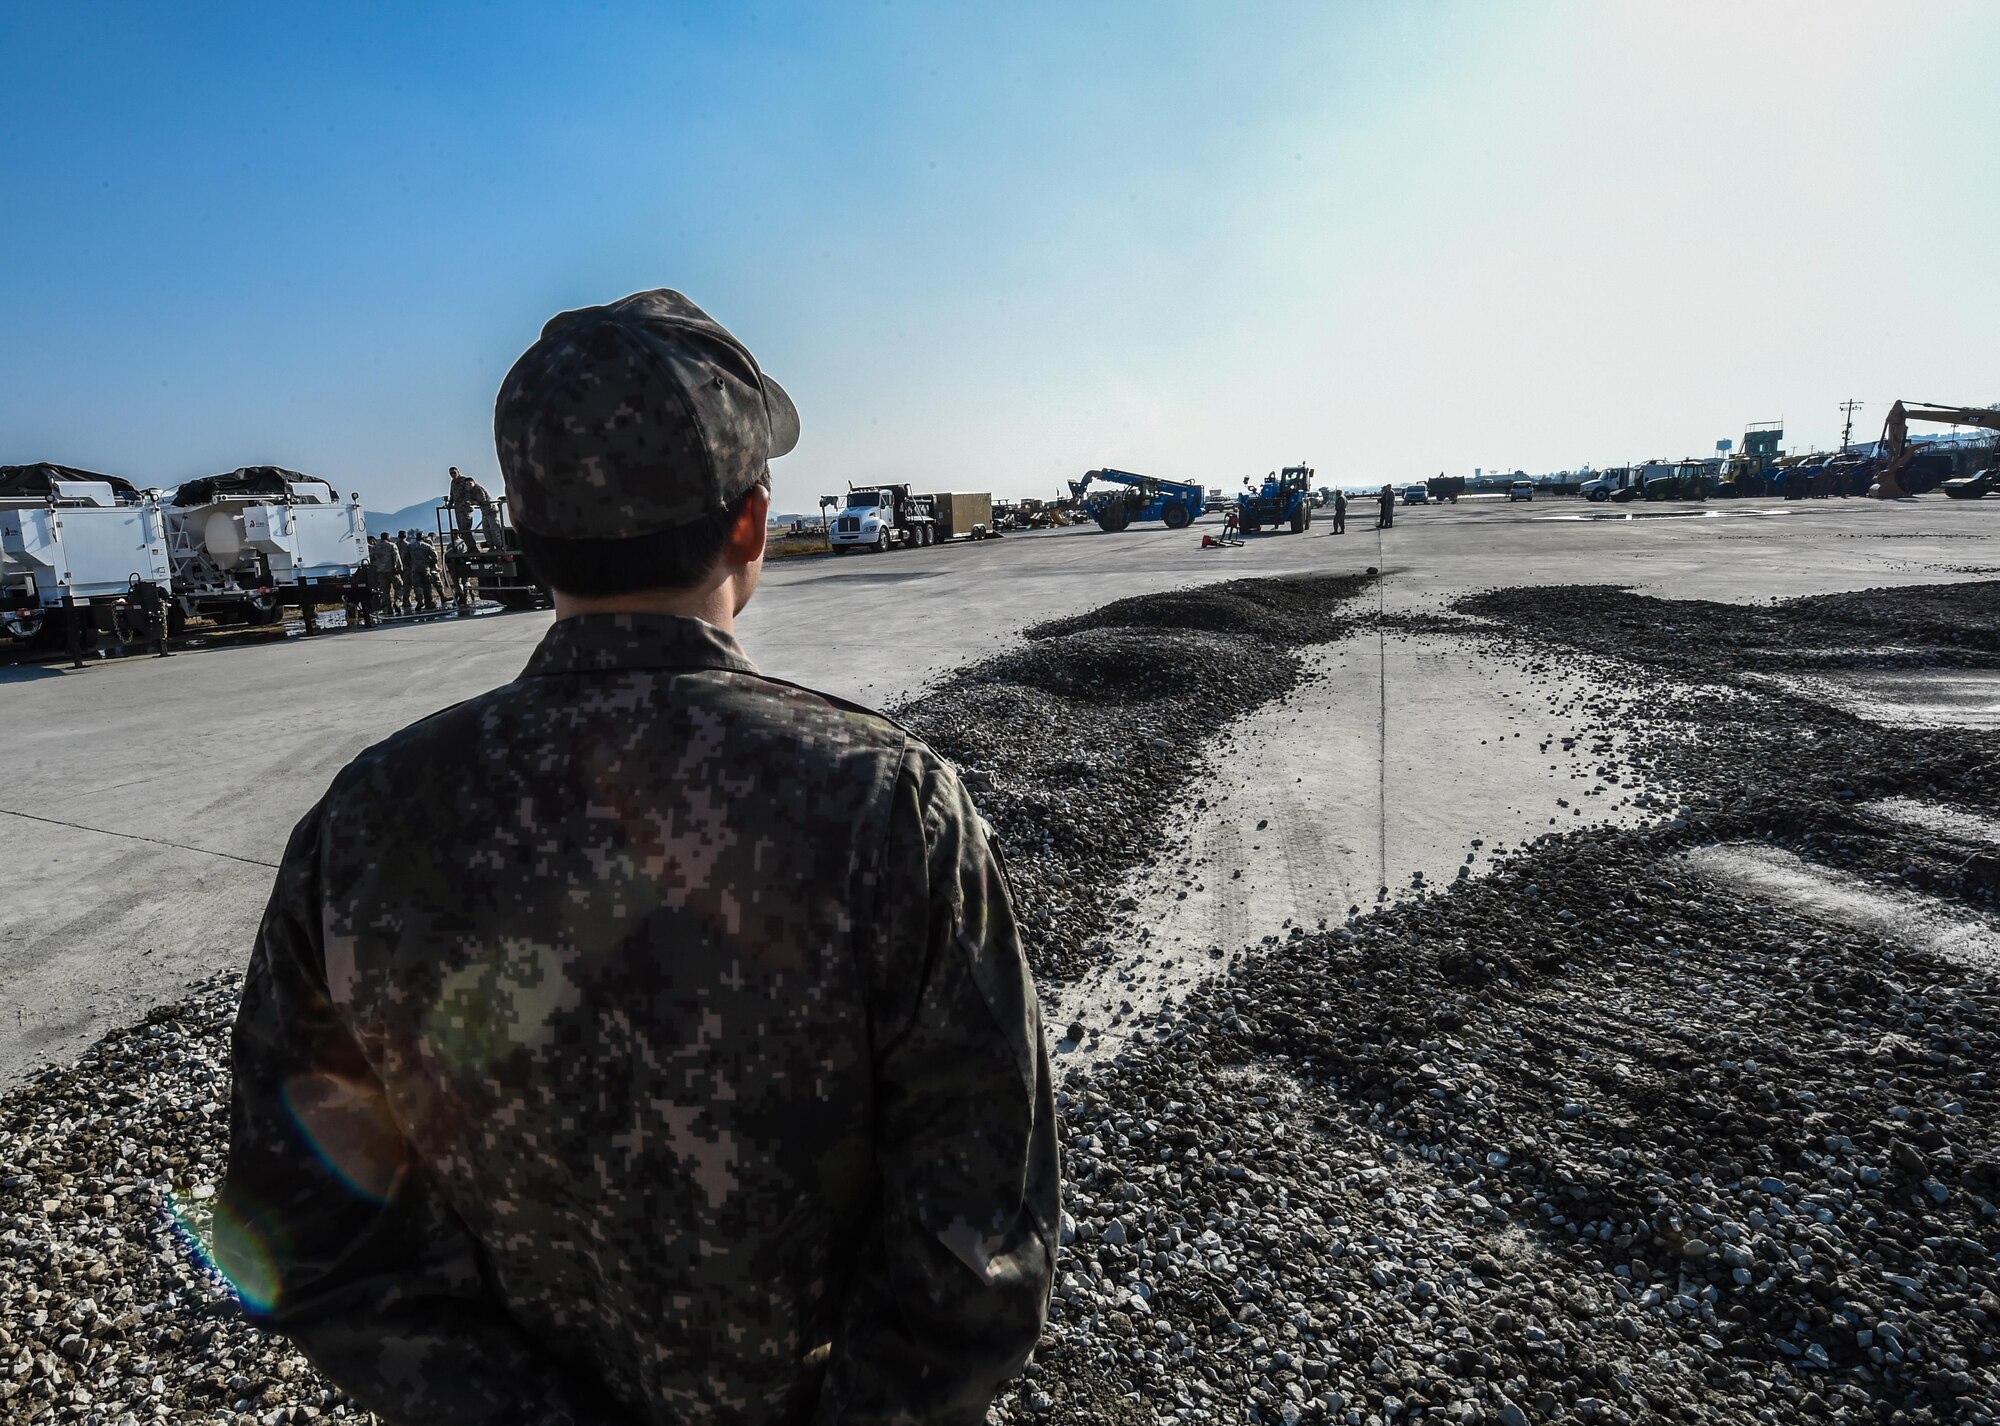 Republic of Korea Air Force Sgt. Kihyun Shim, communications specialist, observes a Rapid Airfield Damage Repair exercise on the airfield at Gwangju Air Base, R.O.K., Nov. 6, 2017. Approximately forty U.S. Airmen from the 773d Civil Engineer Squadron at Joint Base Elmendorf-Richardson, Alaska, and 40 Republic of Korea Airmen from Gwangju trained together for a week to learn a new runway repair process for wartime contingencies. The RADR process makes use of rapid-setting concrete which enables vehicles to pass over it after one hour; after two hours of cure time, it can support any aircraft. (U.S. Air Force photo by Senior Airman Curt Beach)